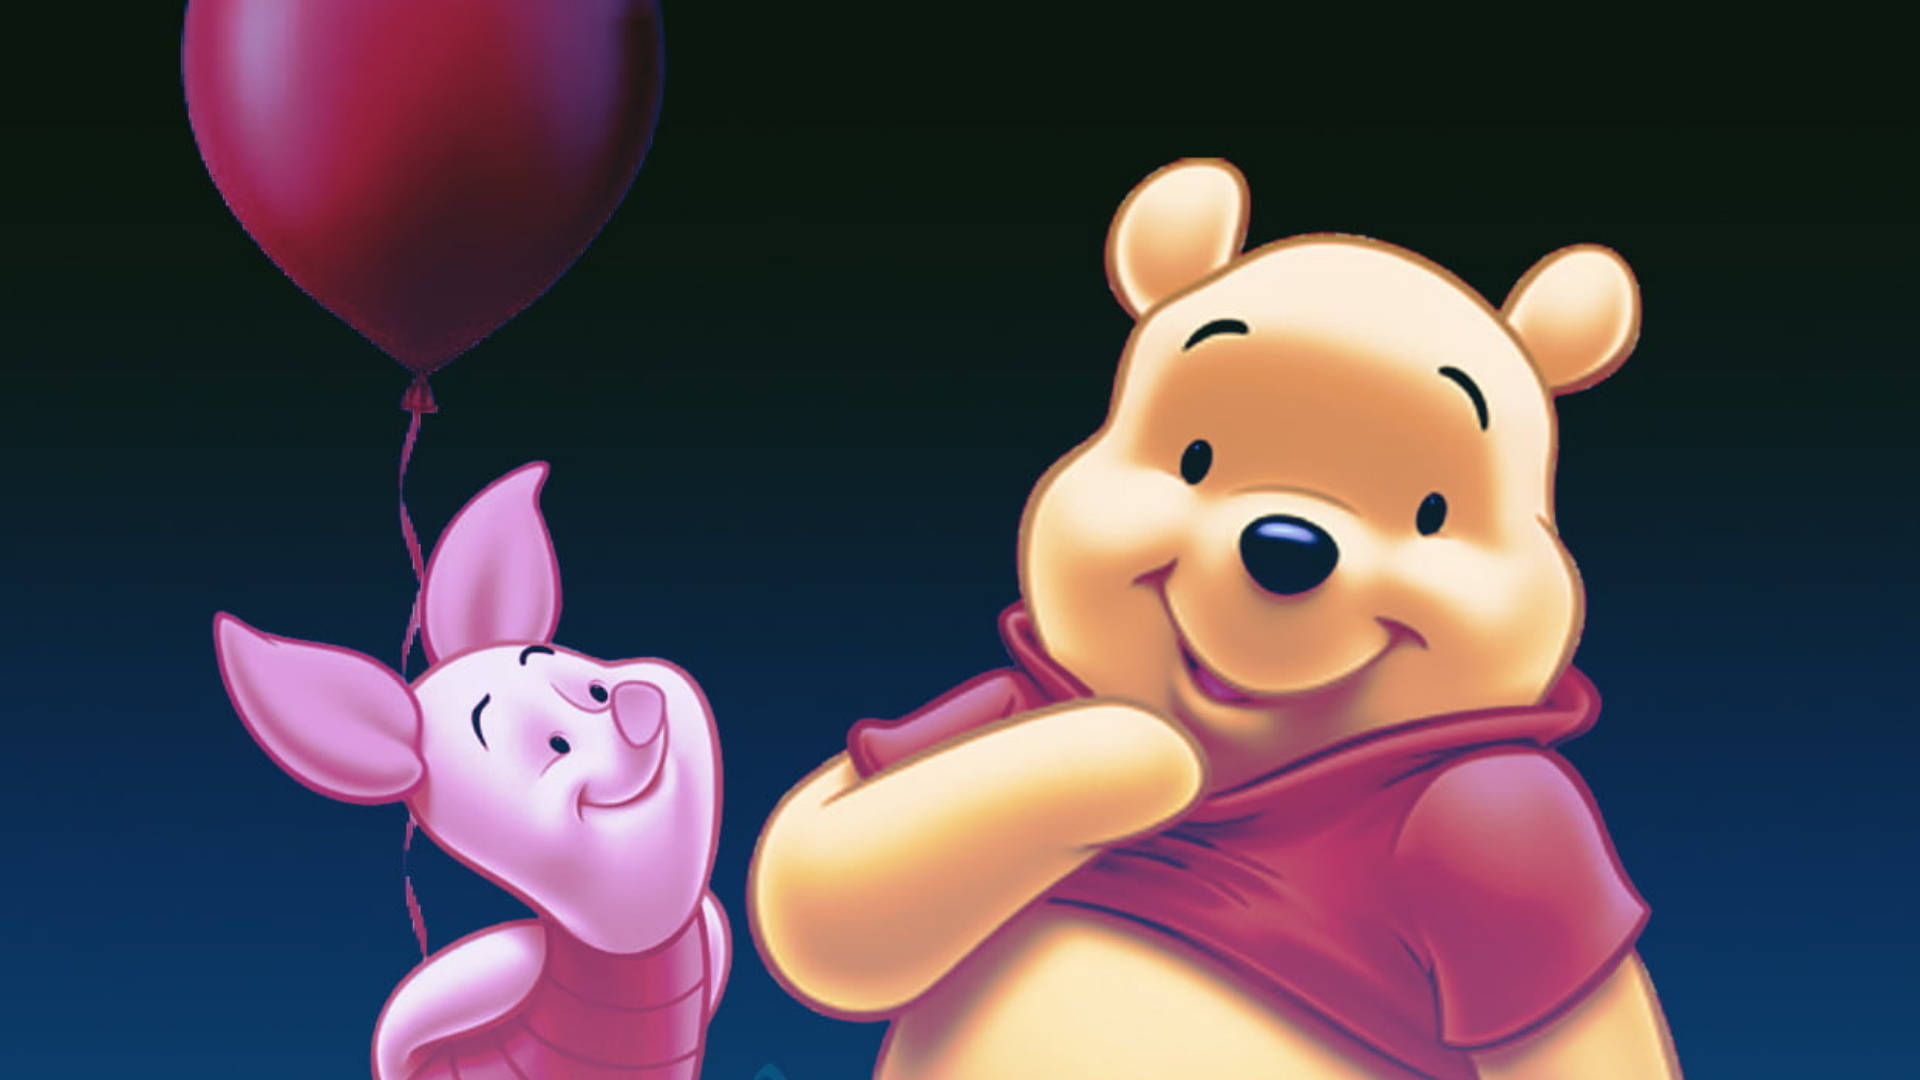 Cute Winnie The Pooh Iphone Pooh And Piglet Wallpaper